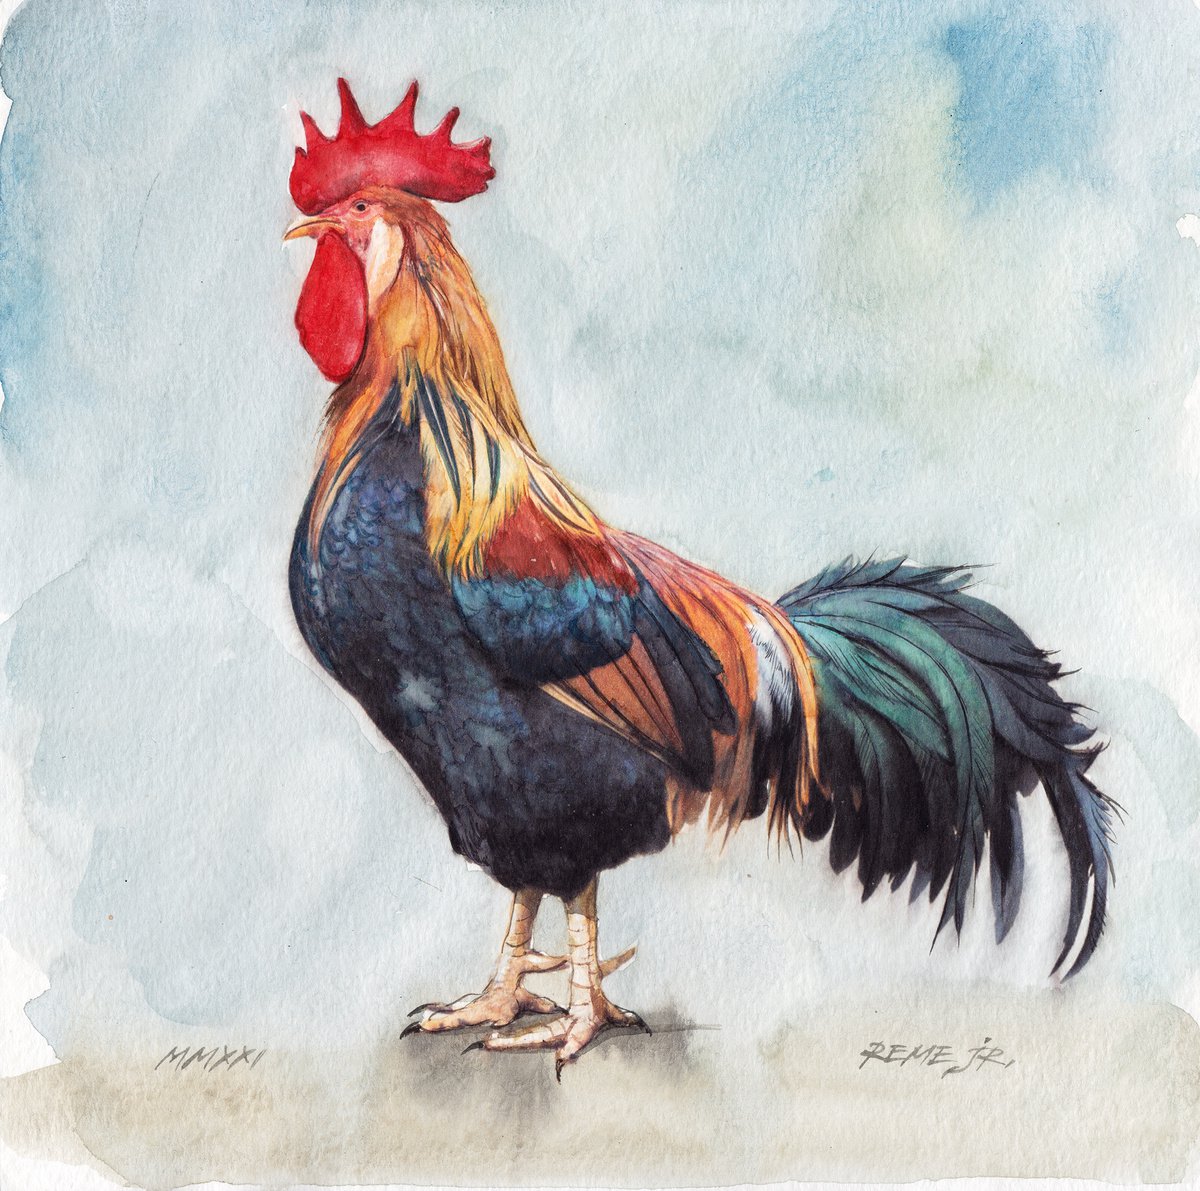 BIRD CLIII - Rooster by REME Jr.